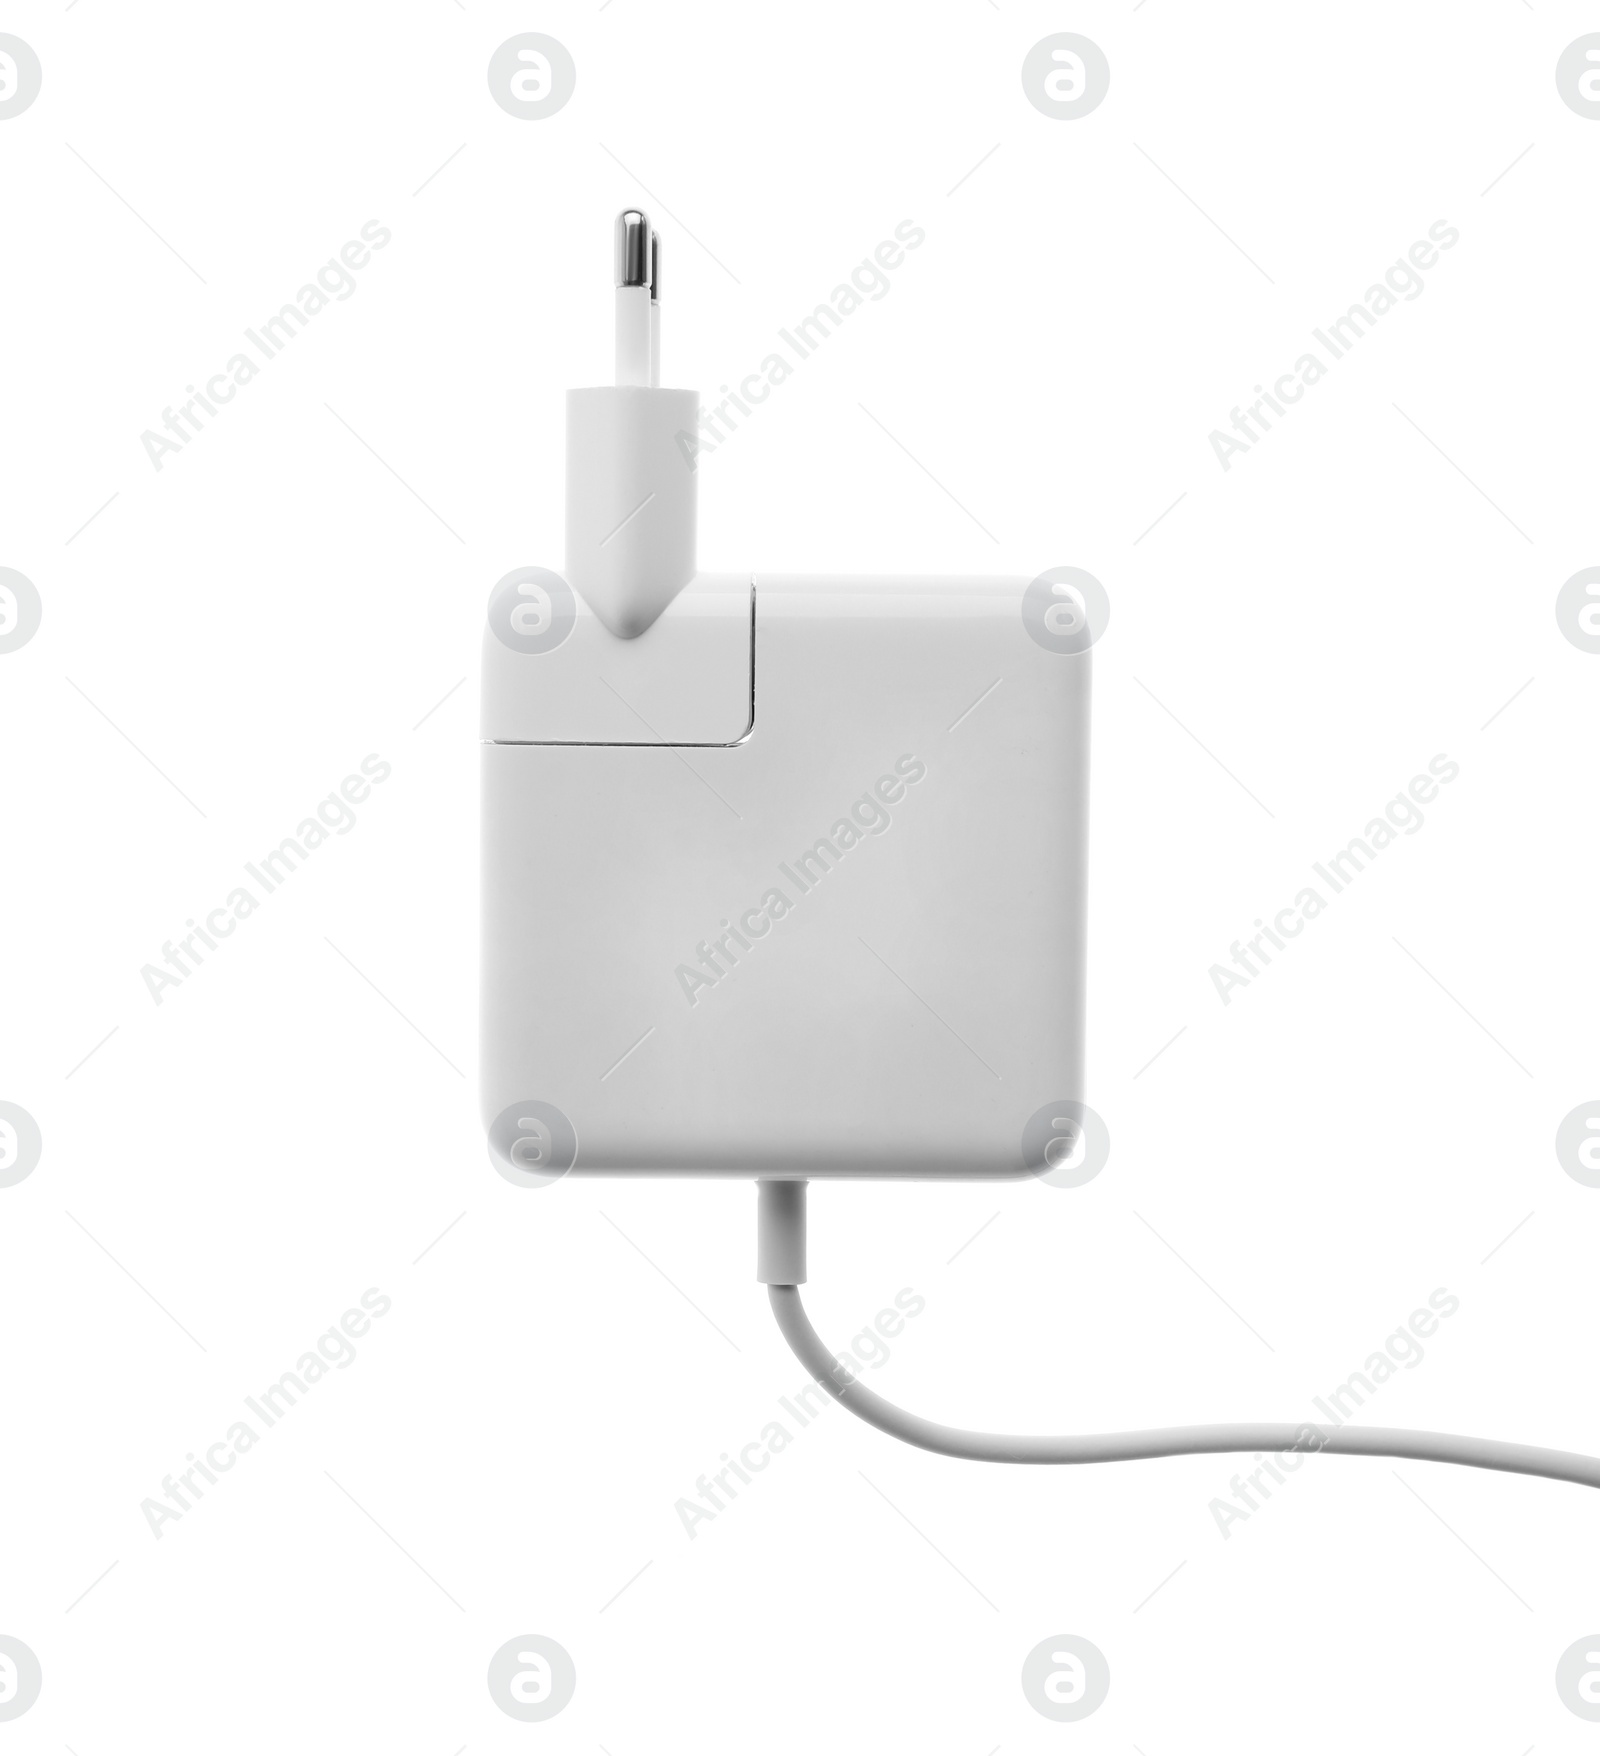 Photo of Power adapter for battery charging isolated on white, top view